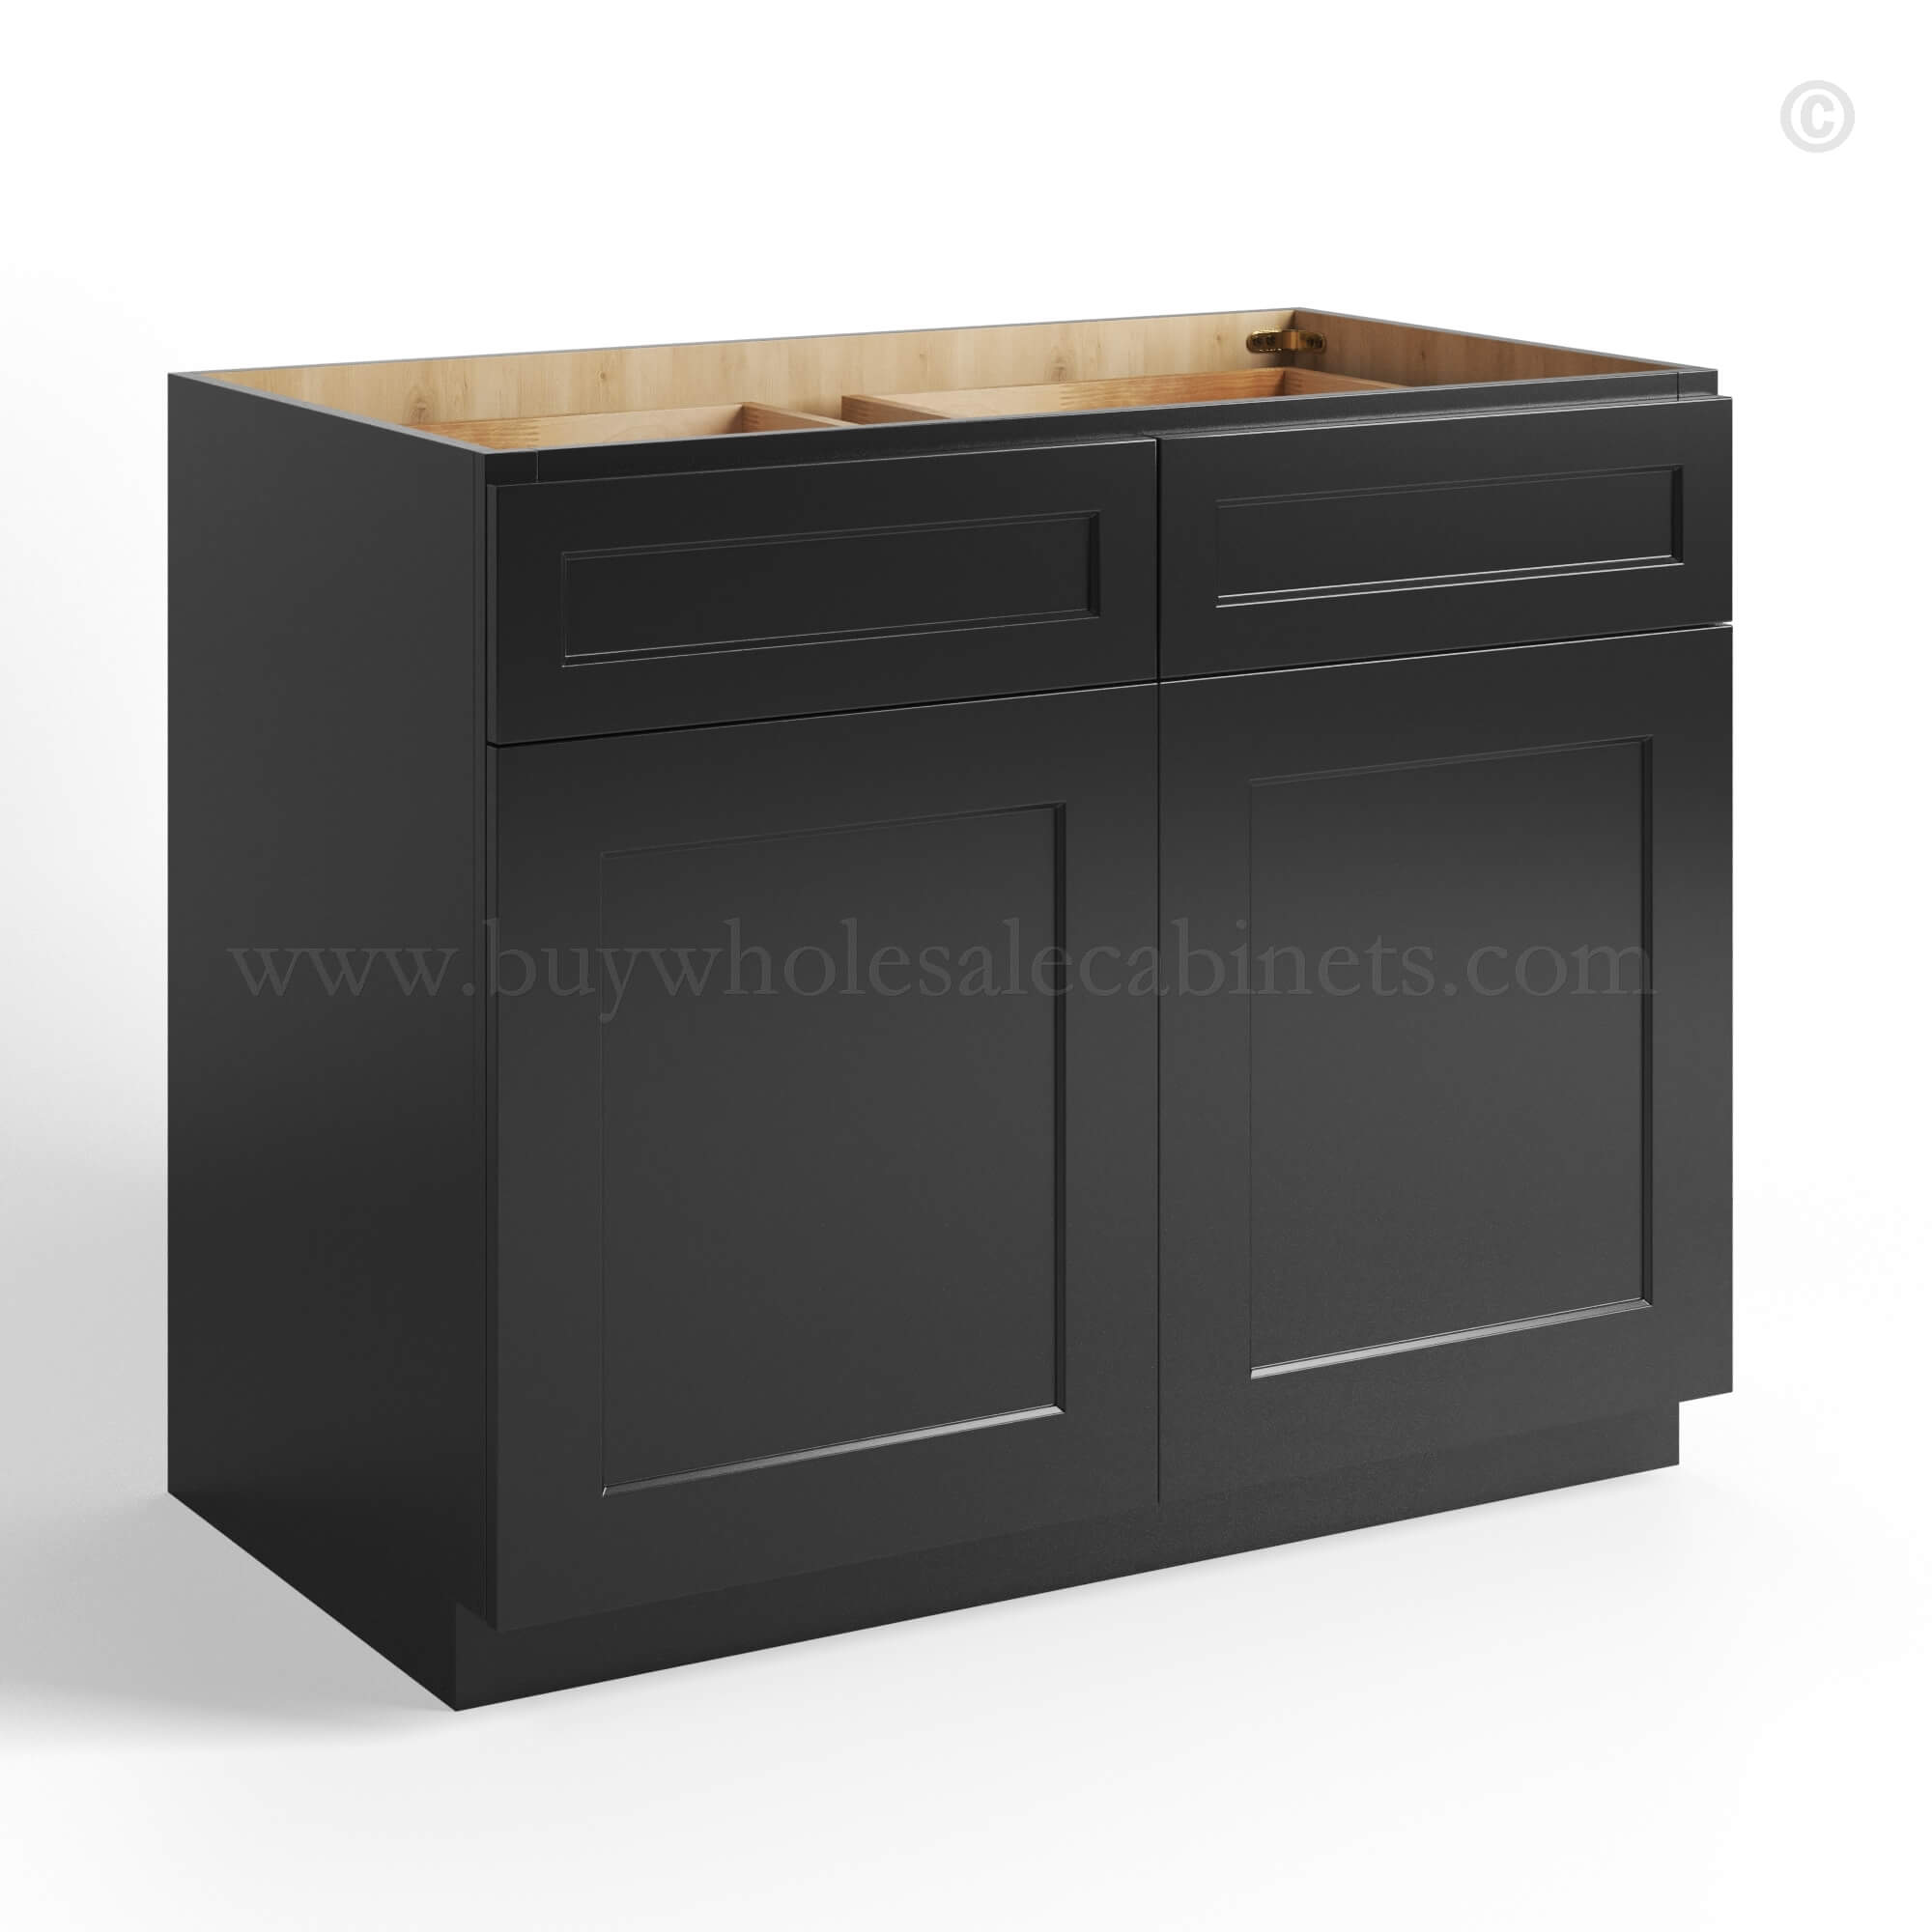 Black Shaker Base Cabinet Double Doors and Double Drawer, rta cabinets, wholesale cabinets